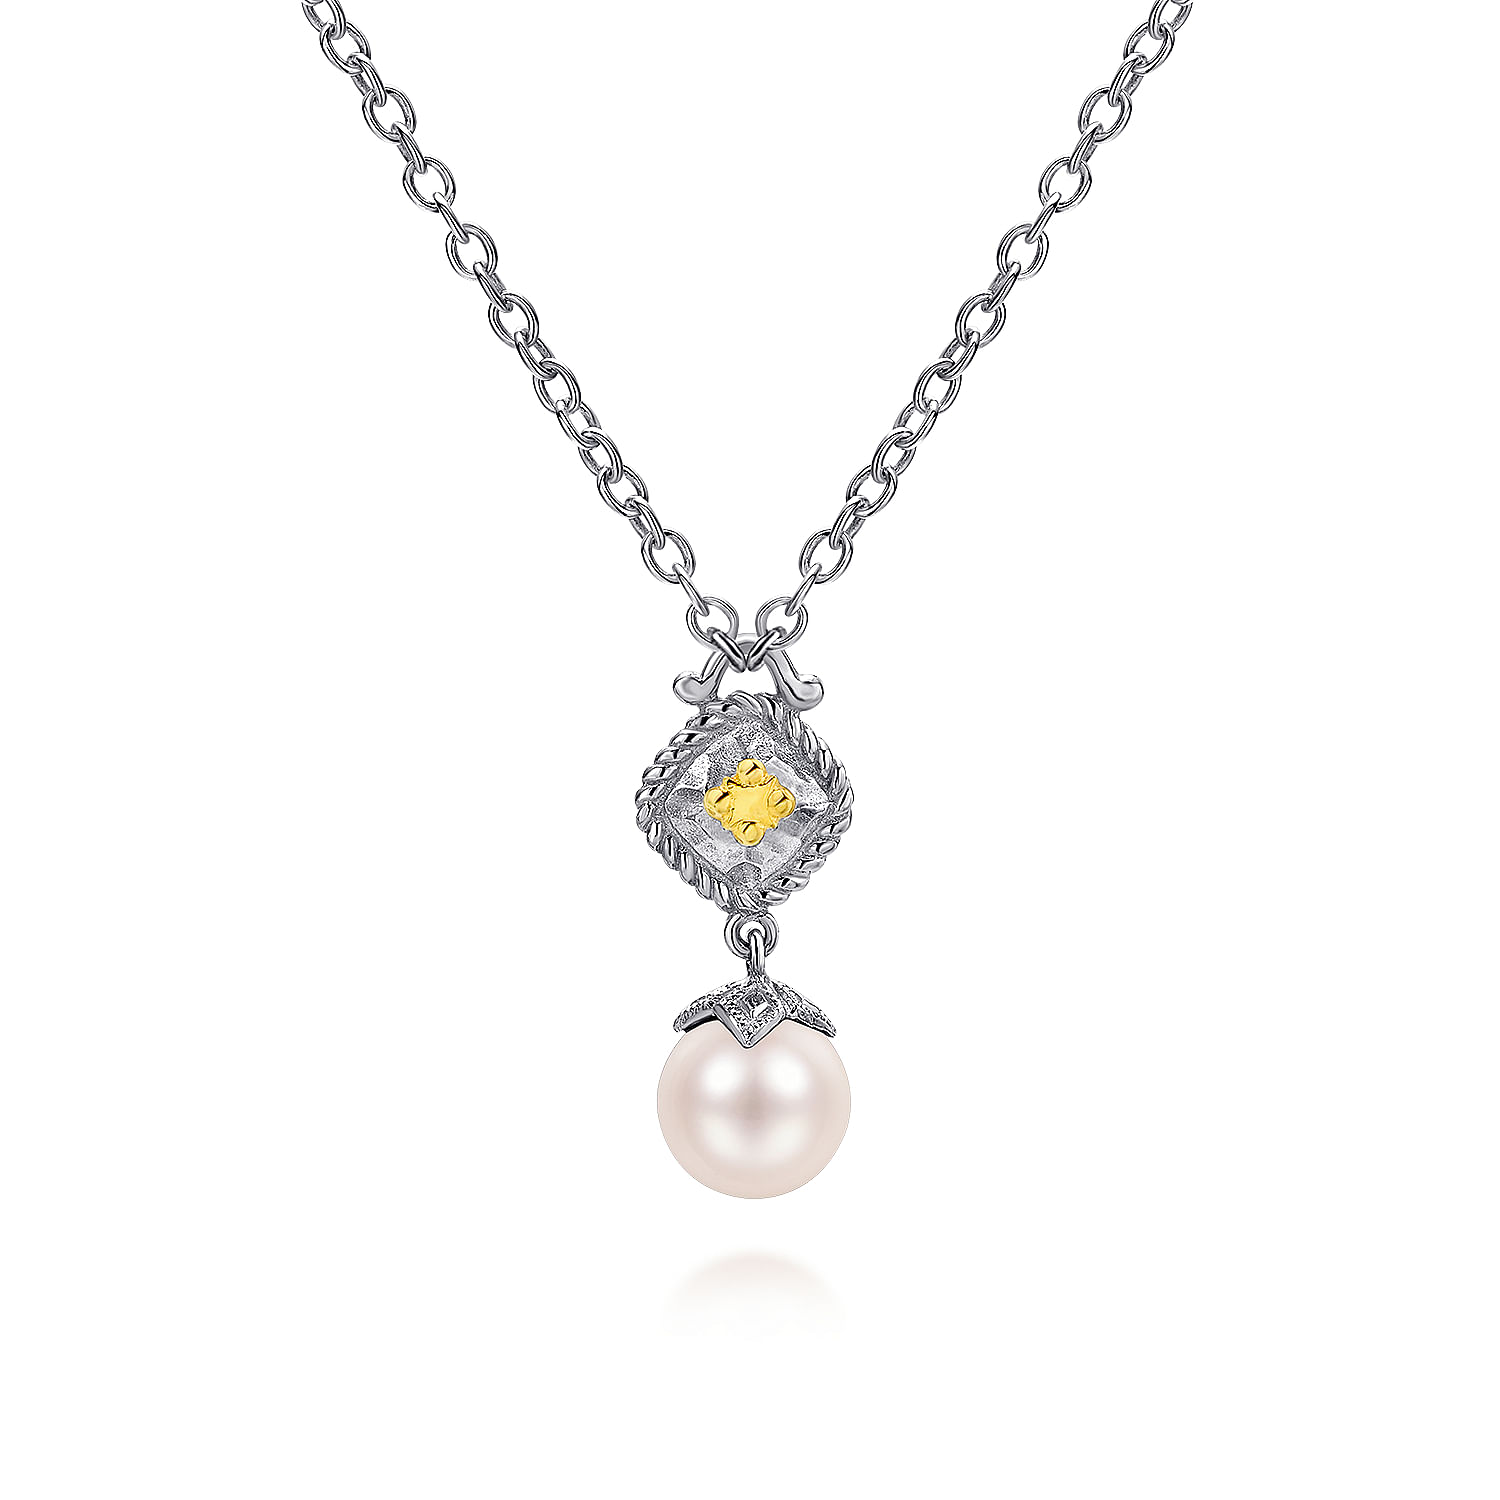 18 inch Vintage Inspired 925 Sterling Silver/18K Yellow Gold Cultured Pearl Drop Pendant